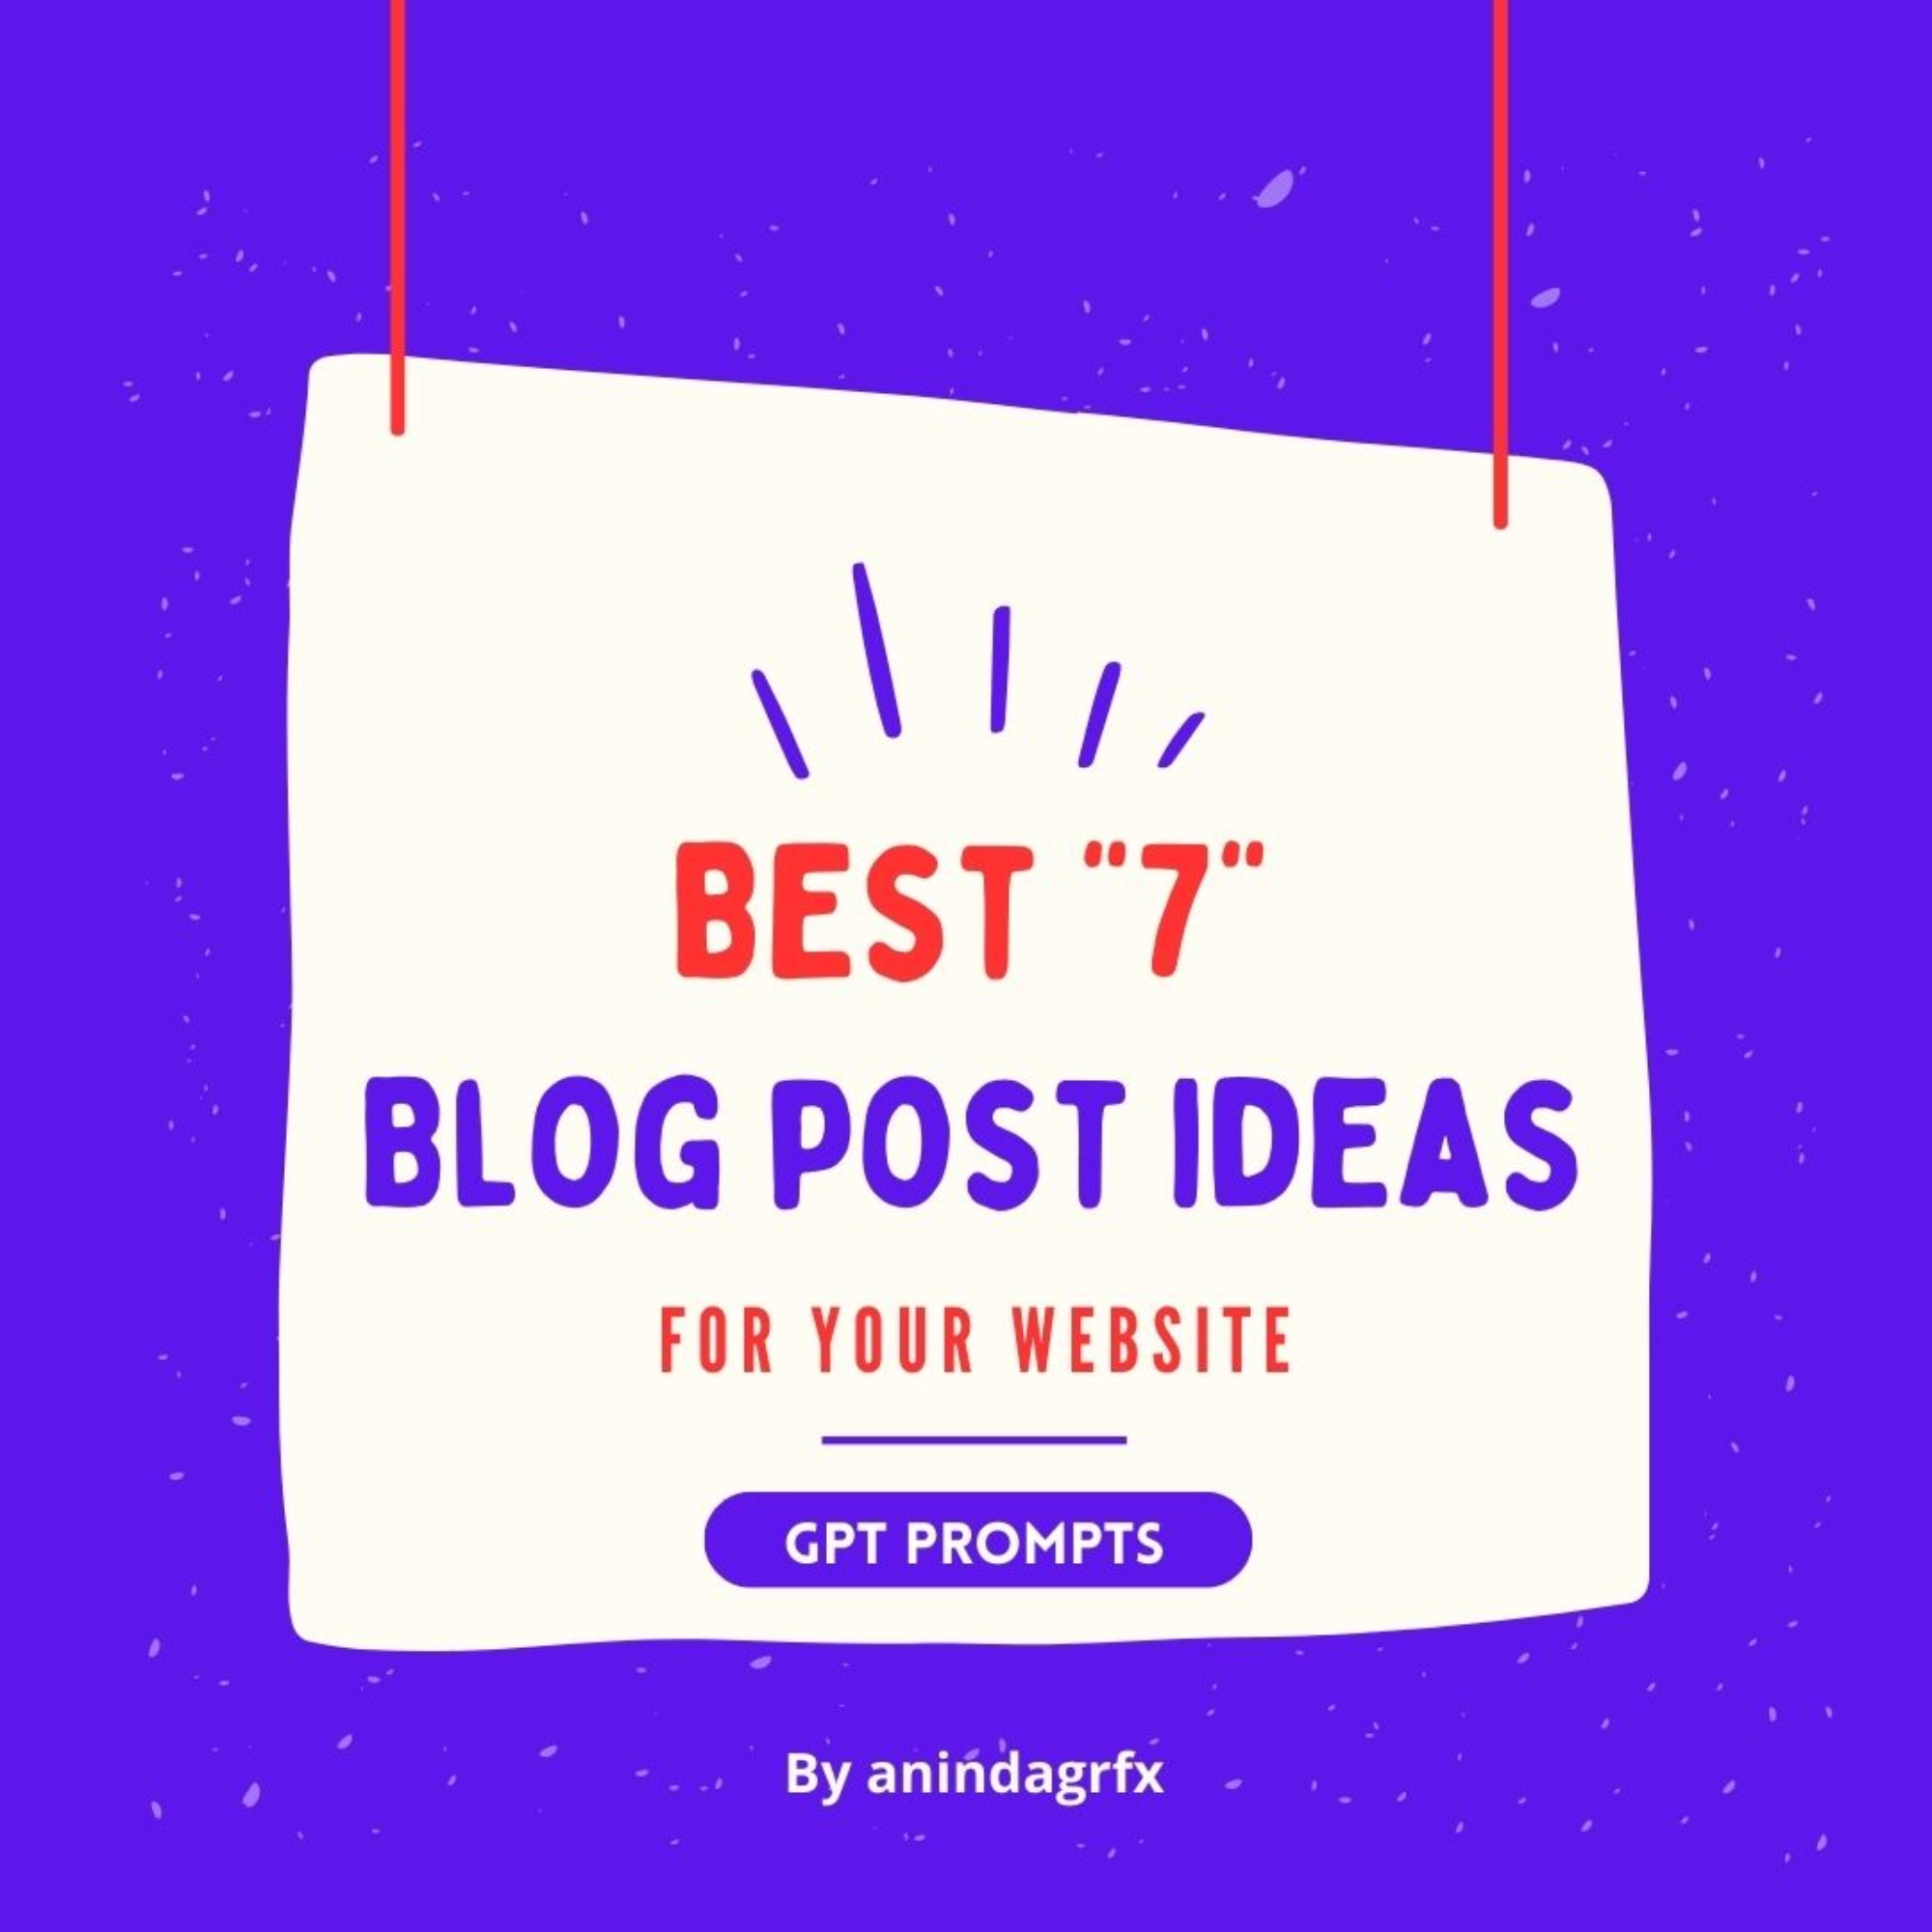 Best 7 Blog Post ideas For Your Website GPT Prompts cover image.